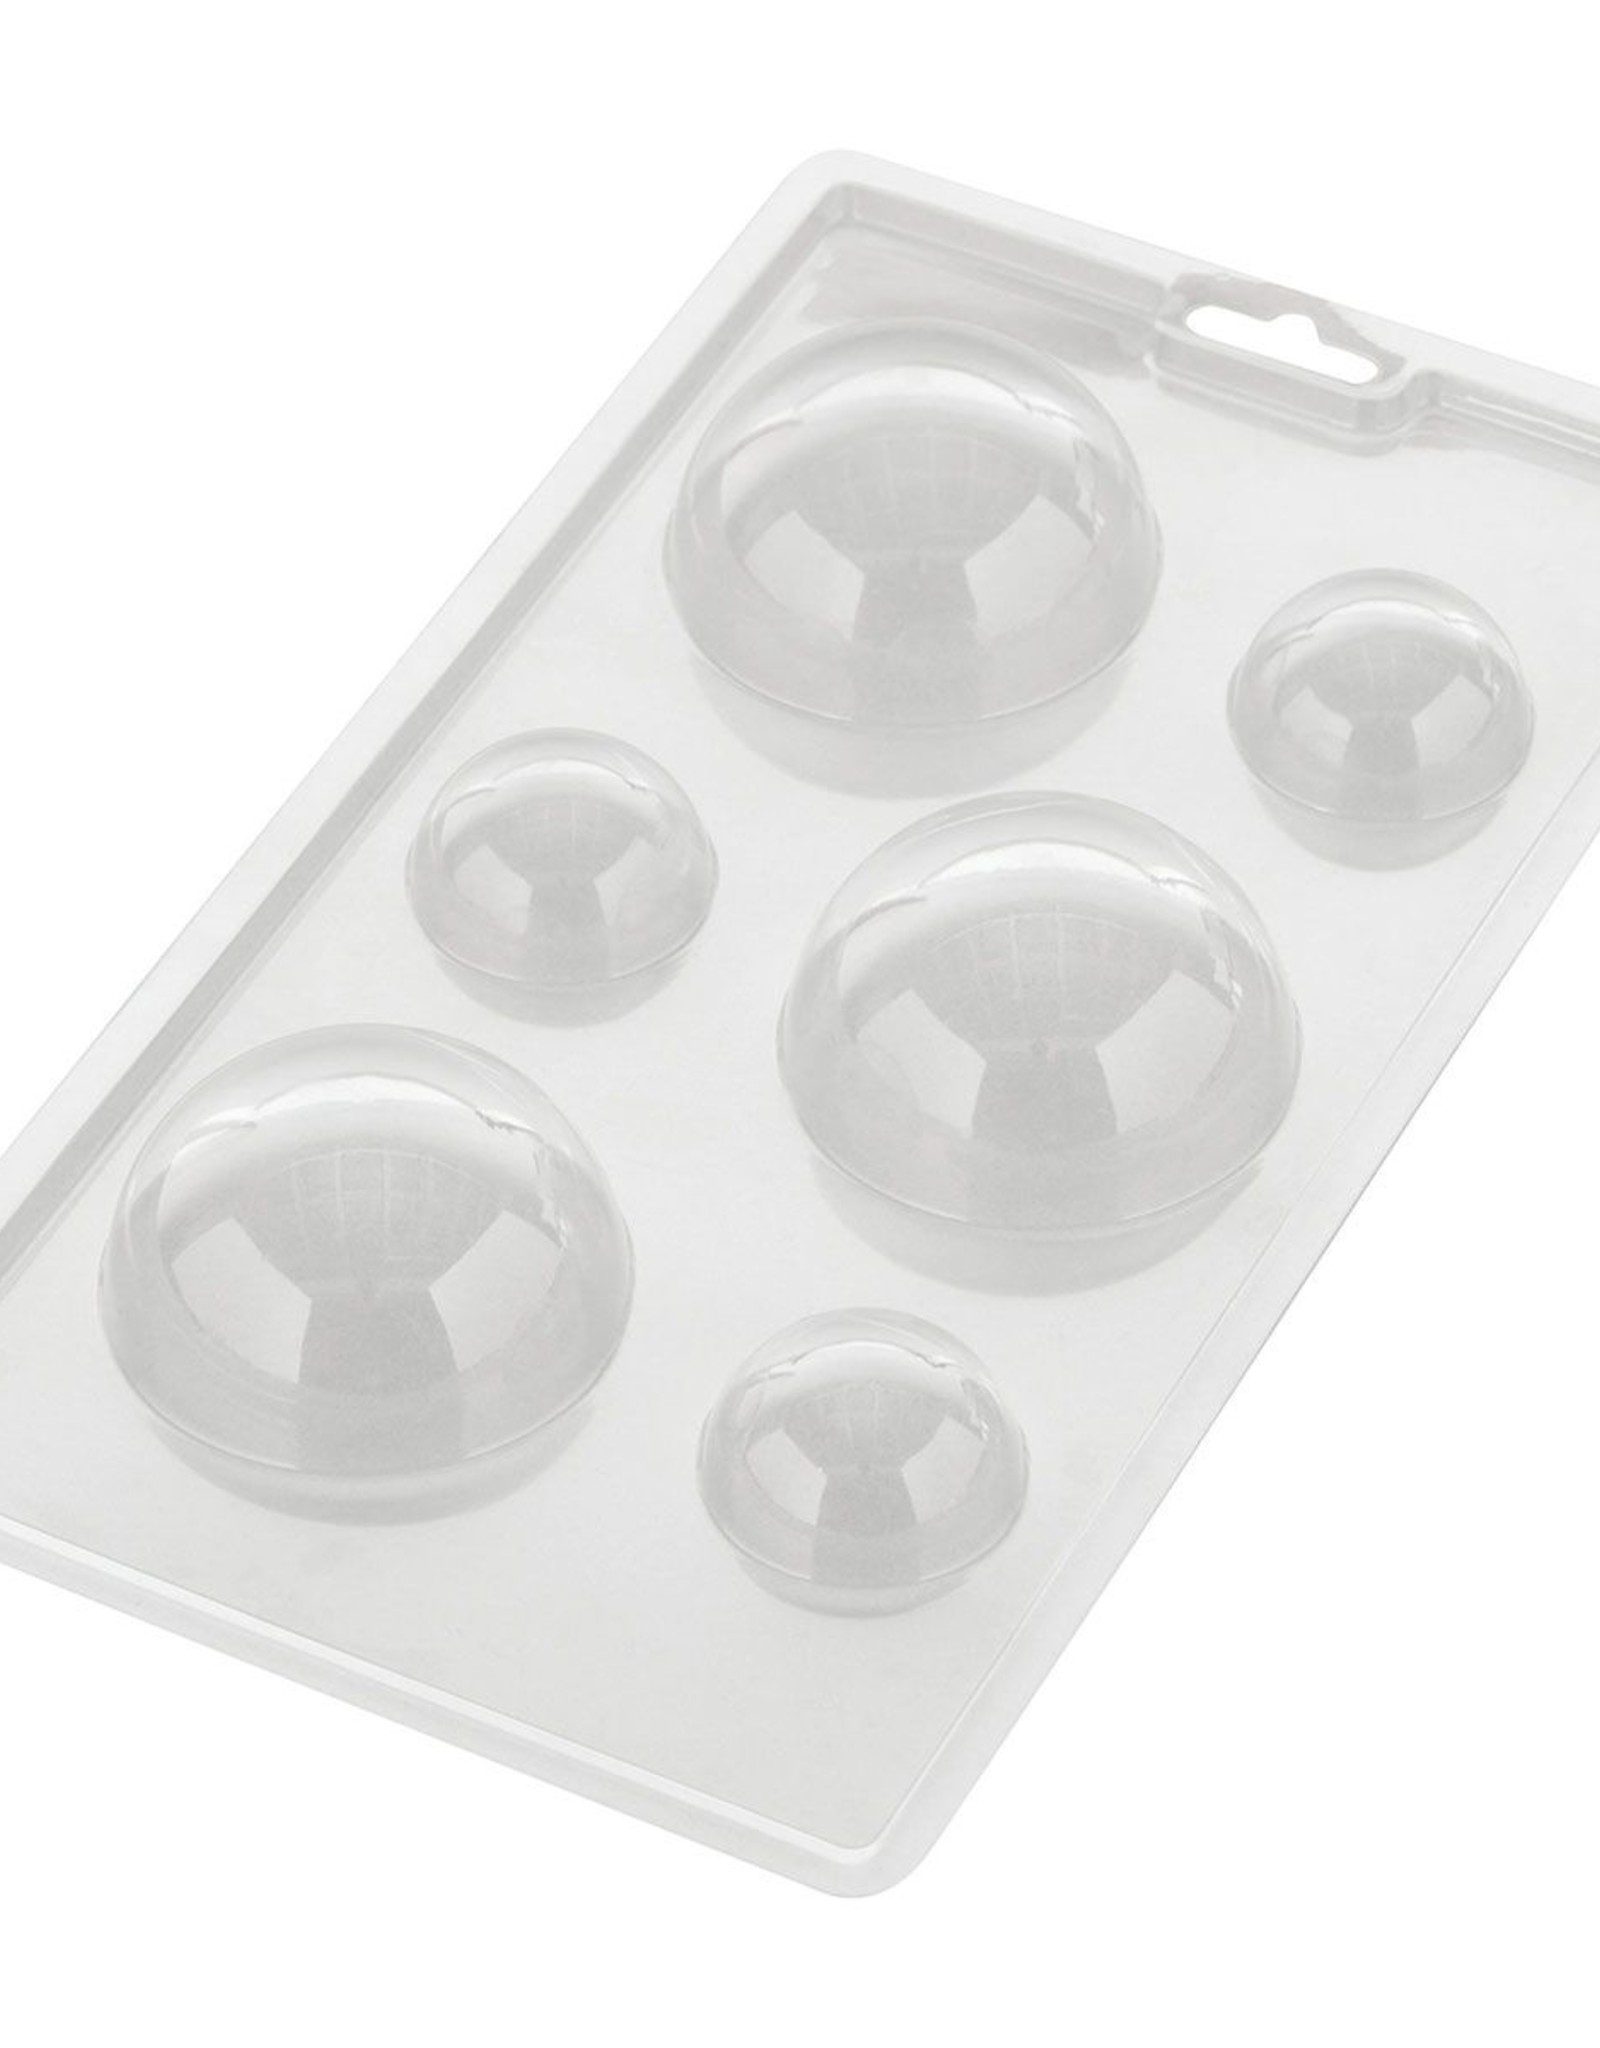 Wilton Wilton 3D Hot Chocolate Ball Candy Mould